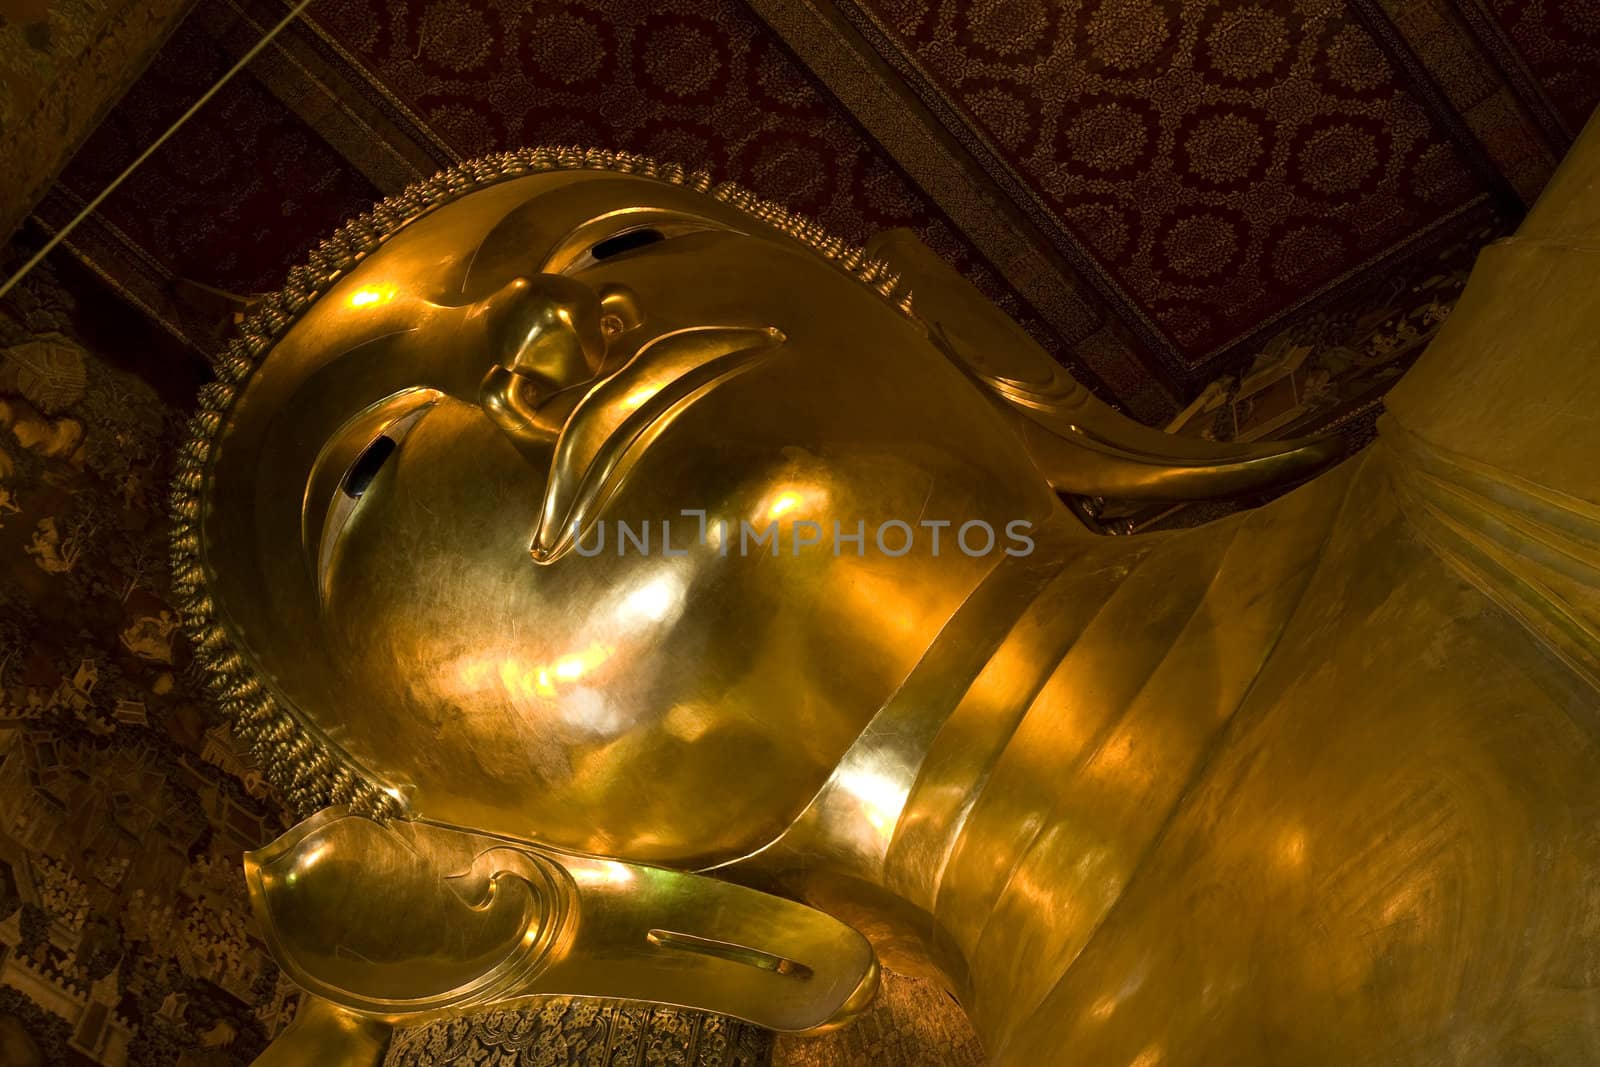 Golden Statue of Reclining Buddha by foto76